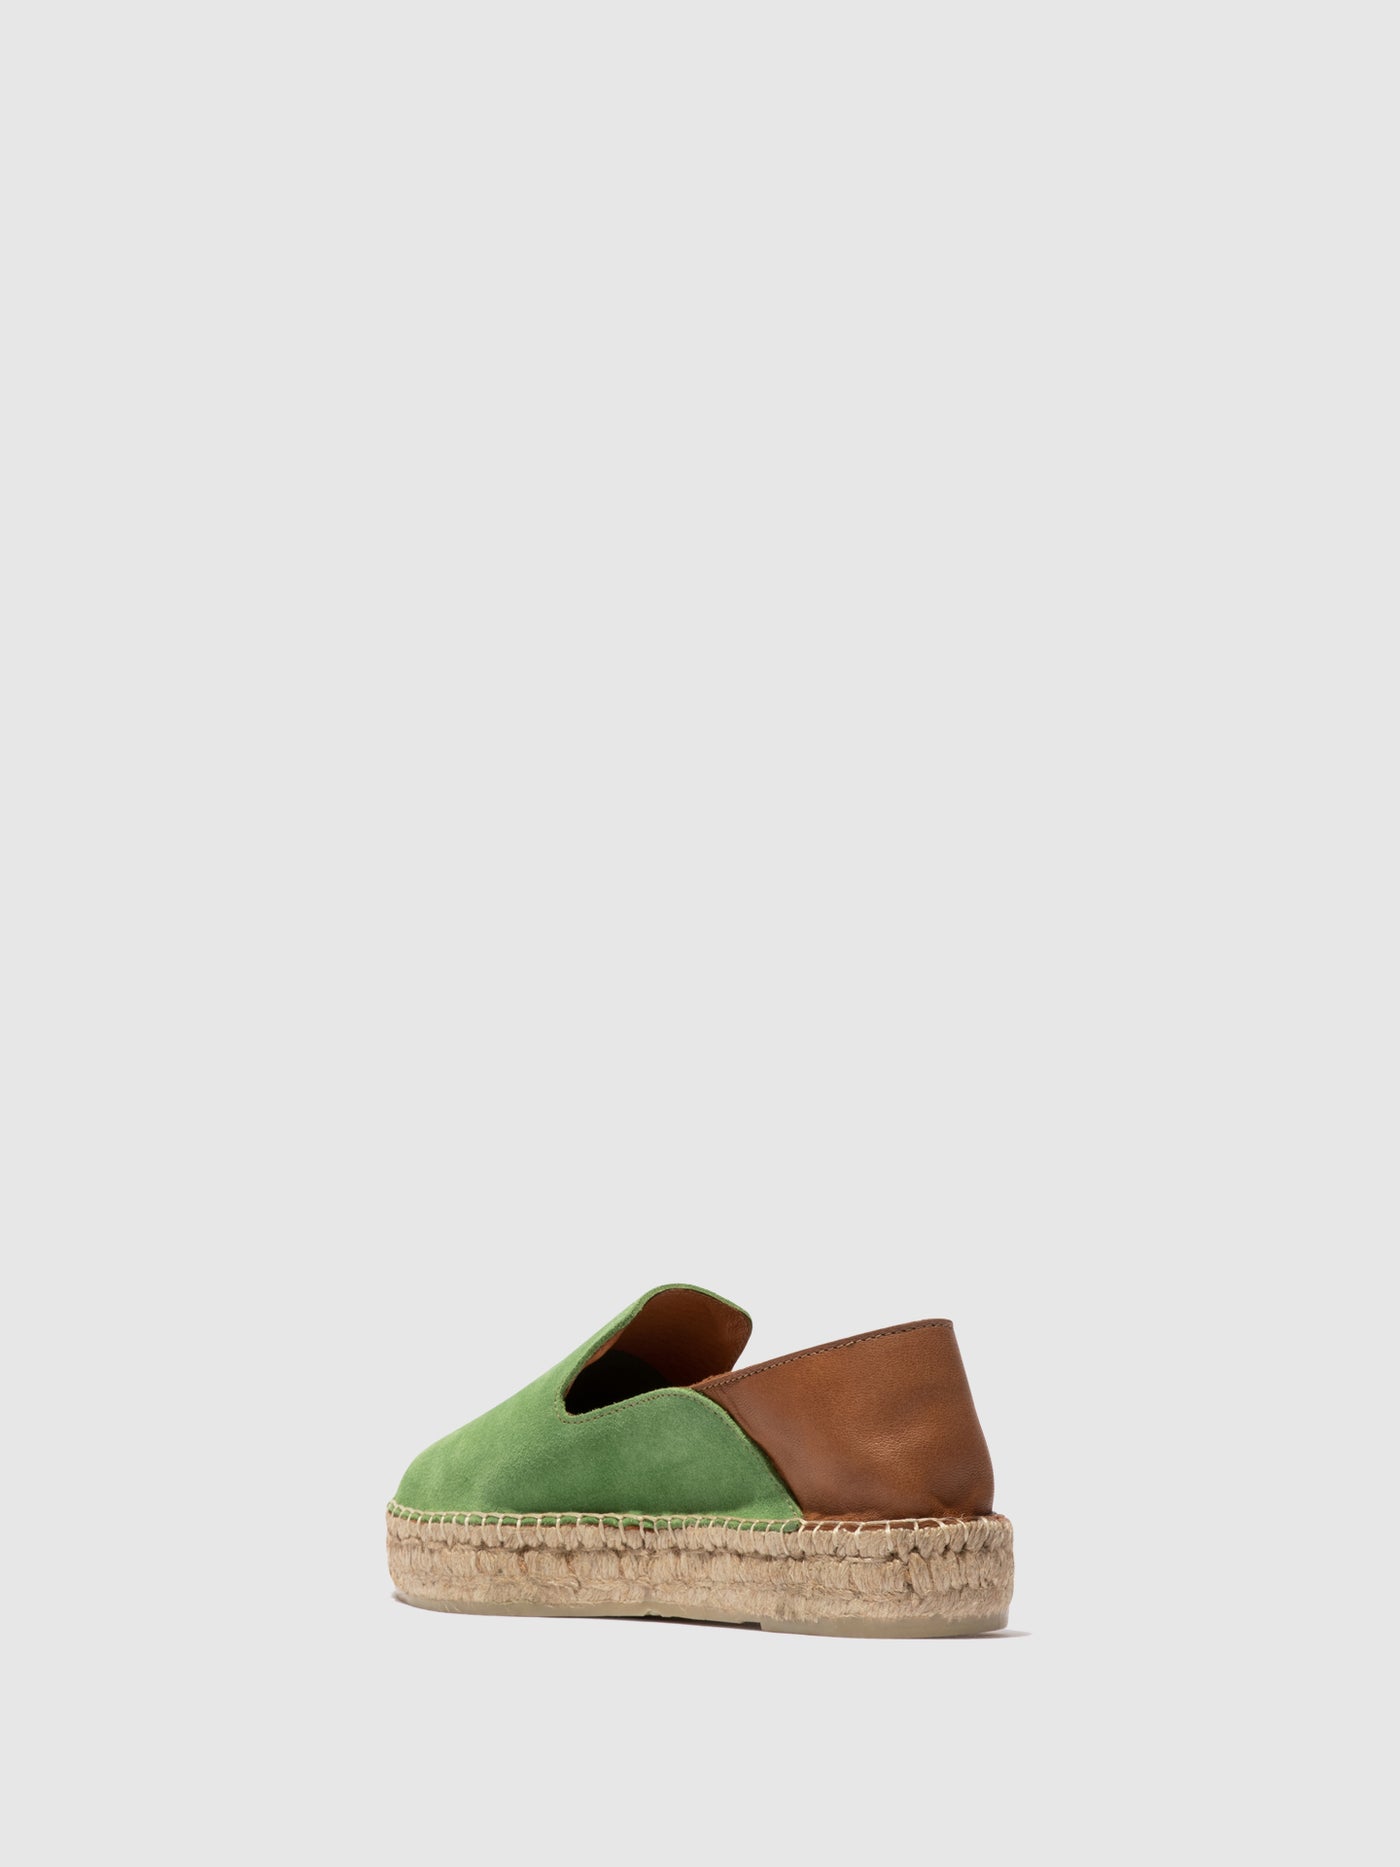 Slip-on Espadrilles PULY522FLY GREEN/TAN